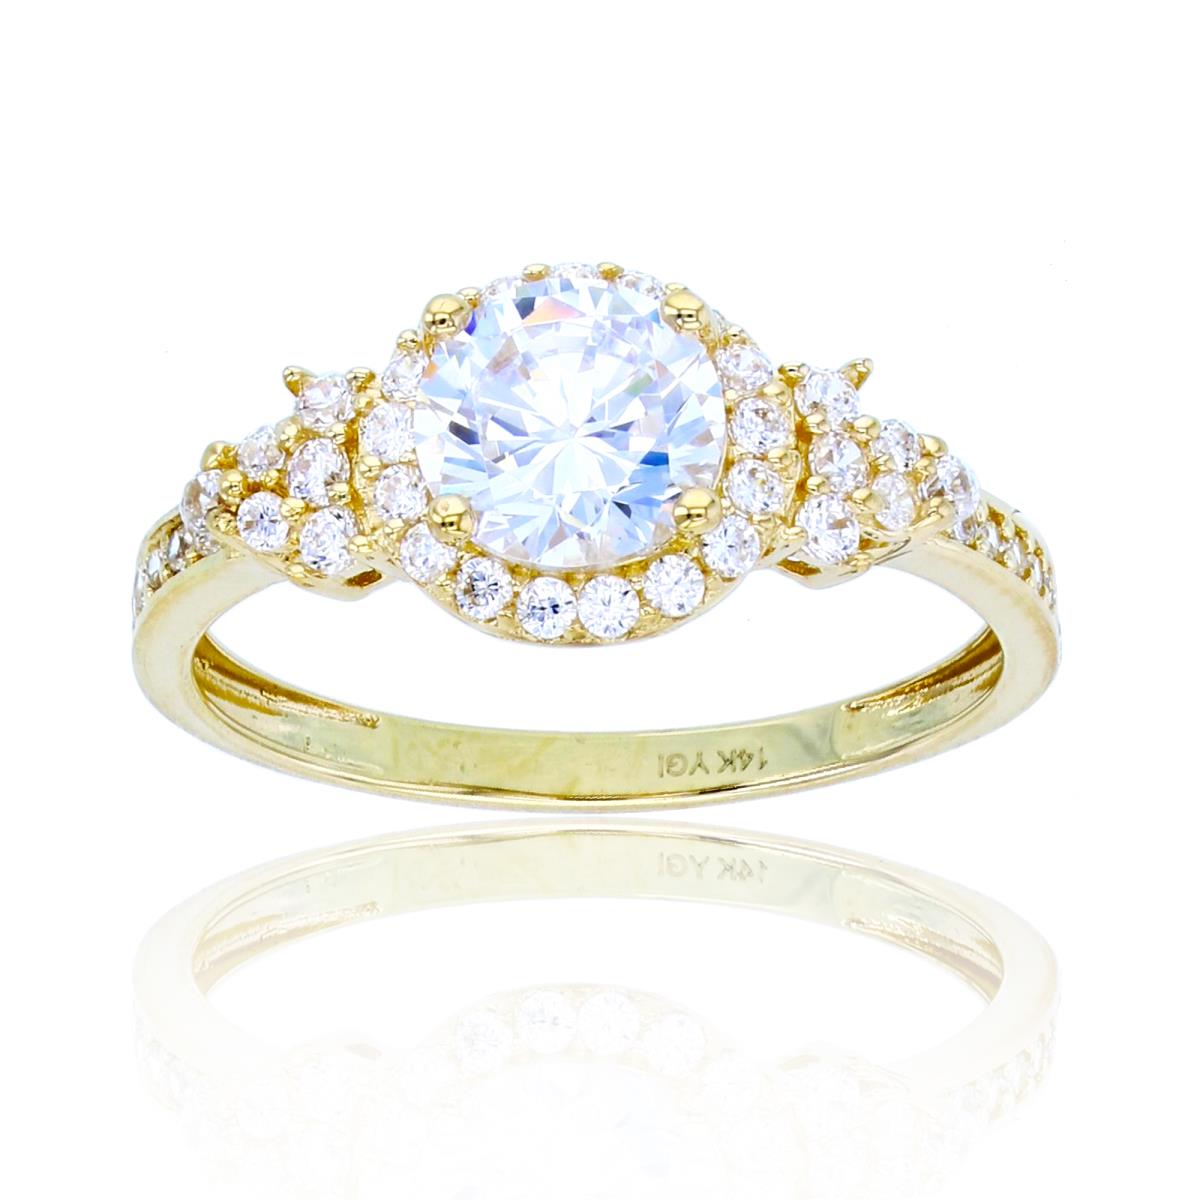 14K Yellow Gold 6.5mm Rnd CZ Center & CZ Trill on Side Halo Engagement Ring